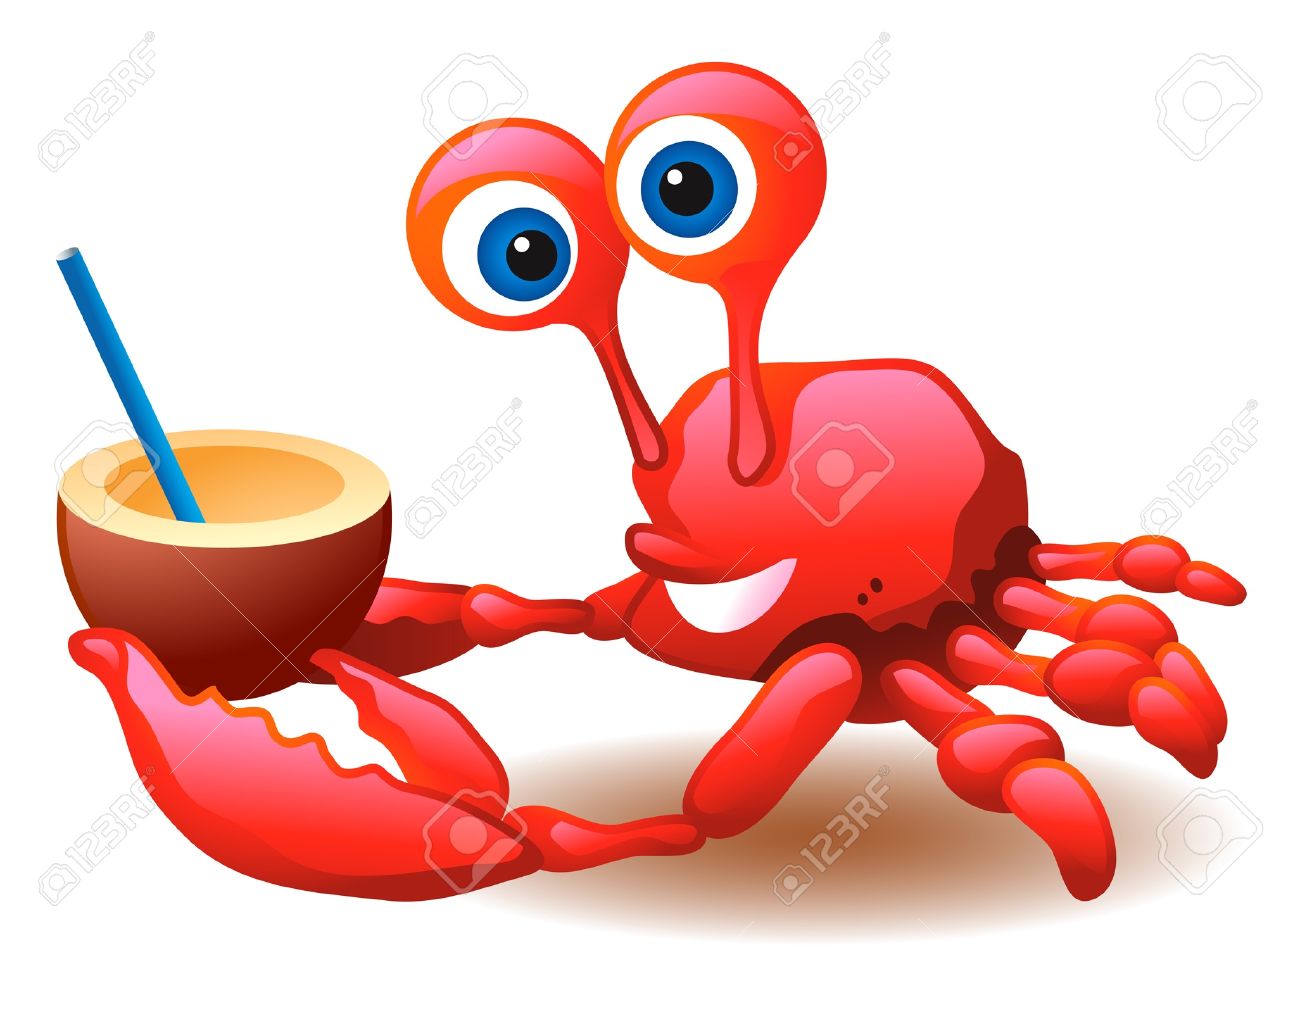 Coconut Crab clipart #12, Download drawings